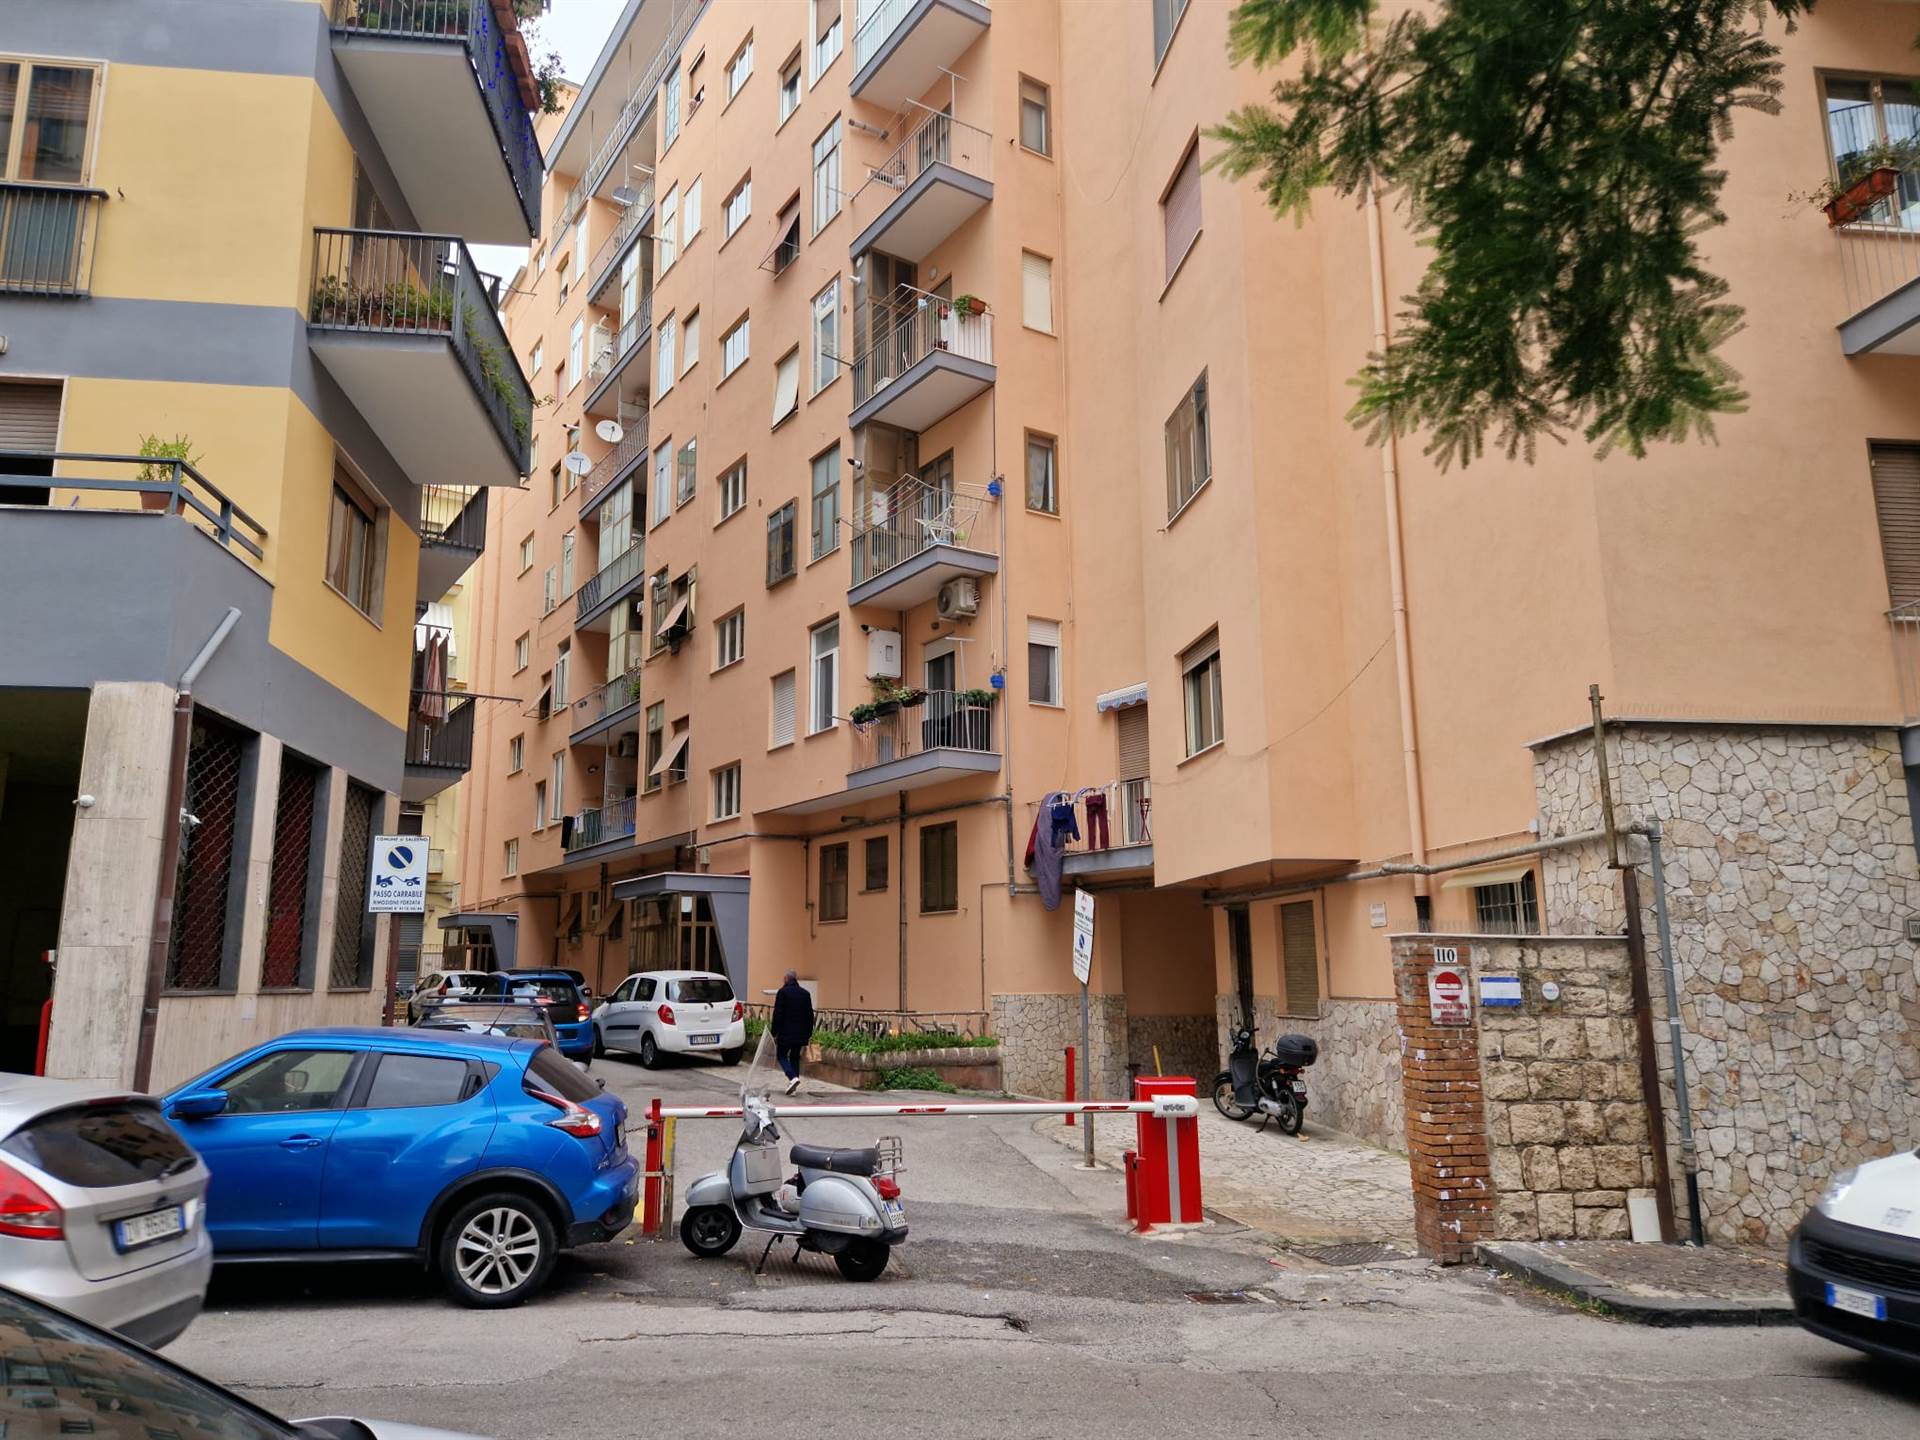 CENTRO, SALERNO, Apartment for sale of 100 Sq. mt., Good condition, Heating Individual heating system, Energetic class: G, placed at 5°, composed by: 